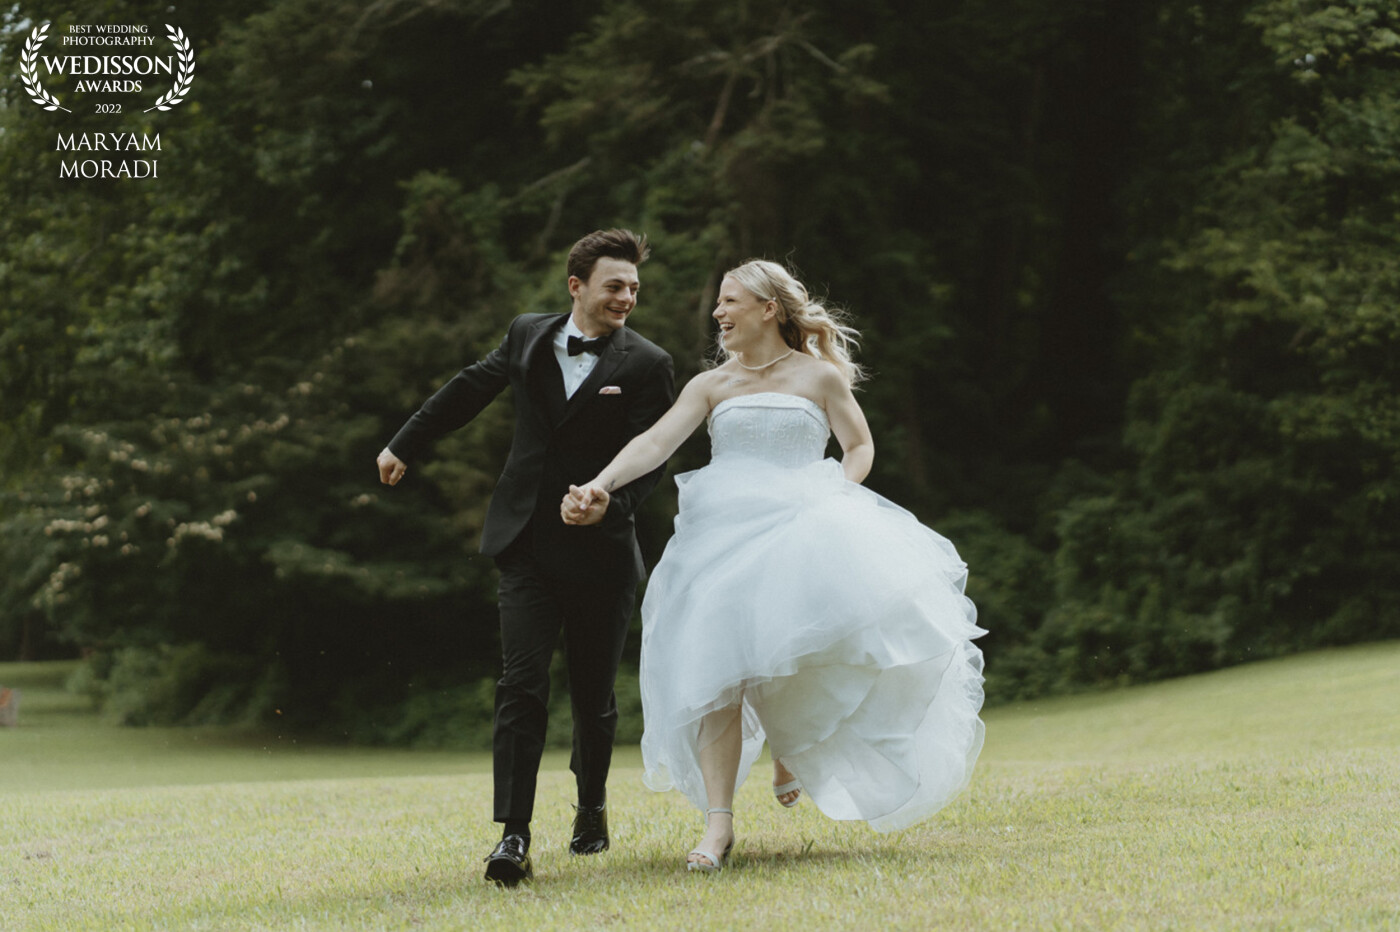 Amanda and Liam<br />
“On the path to our love story” <br />
“running the distance with you” <br />
“Hands and hearts intertwined, running into the future as one”<br />
<br />
@marymor_photography<br />
New York, US